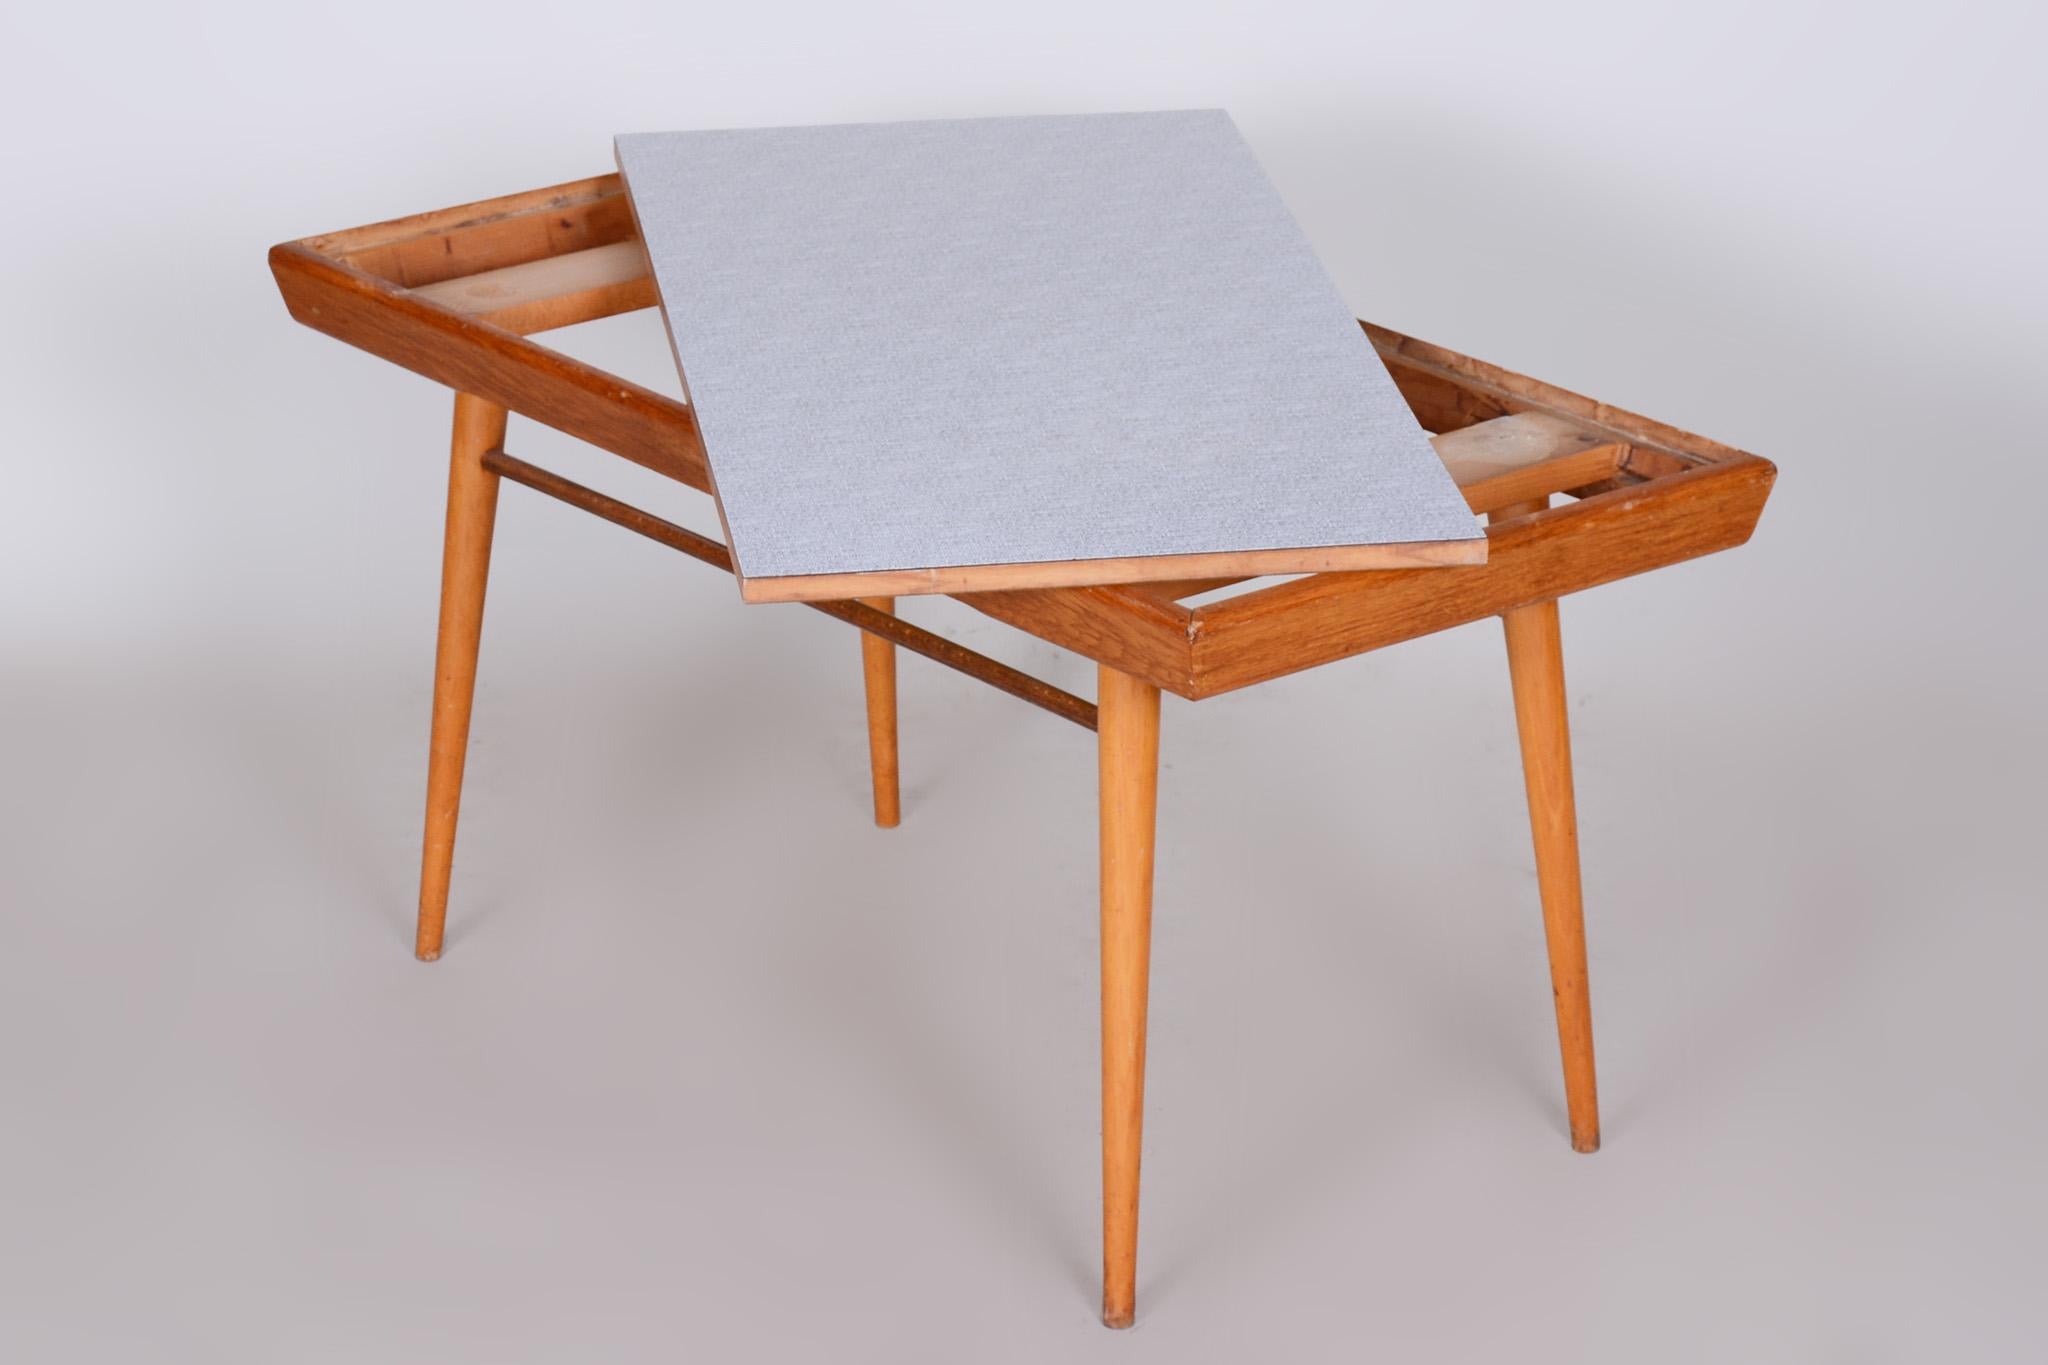 Oak Midcentury Coffee Table, Well-Preserved Condition, Czechia, 1950s For Sale 2